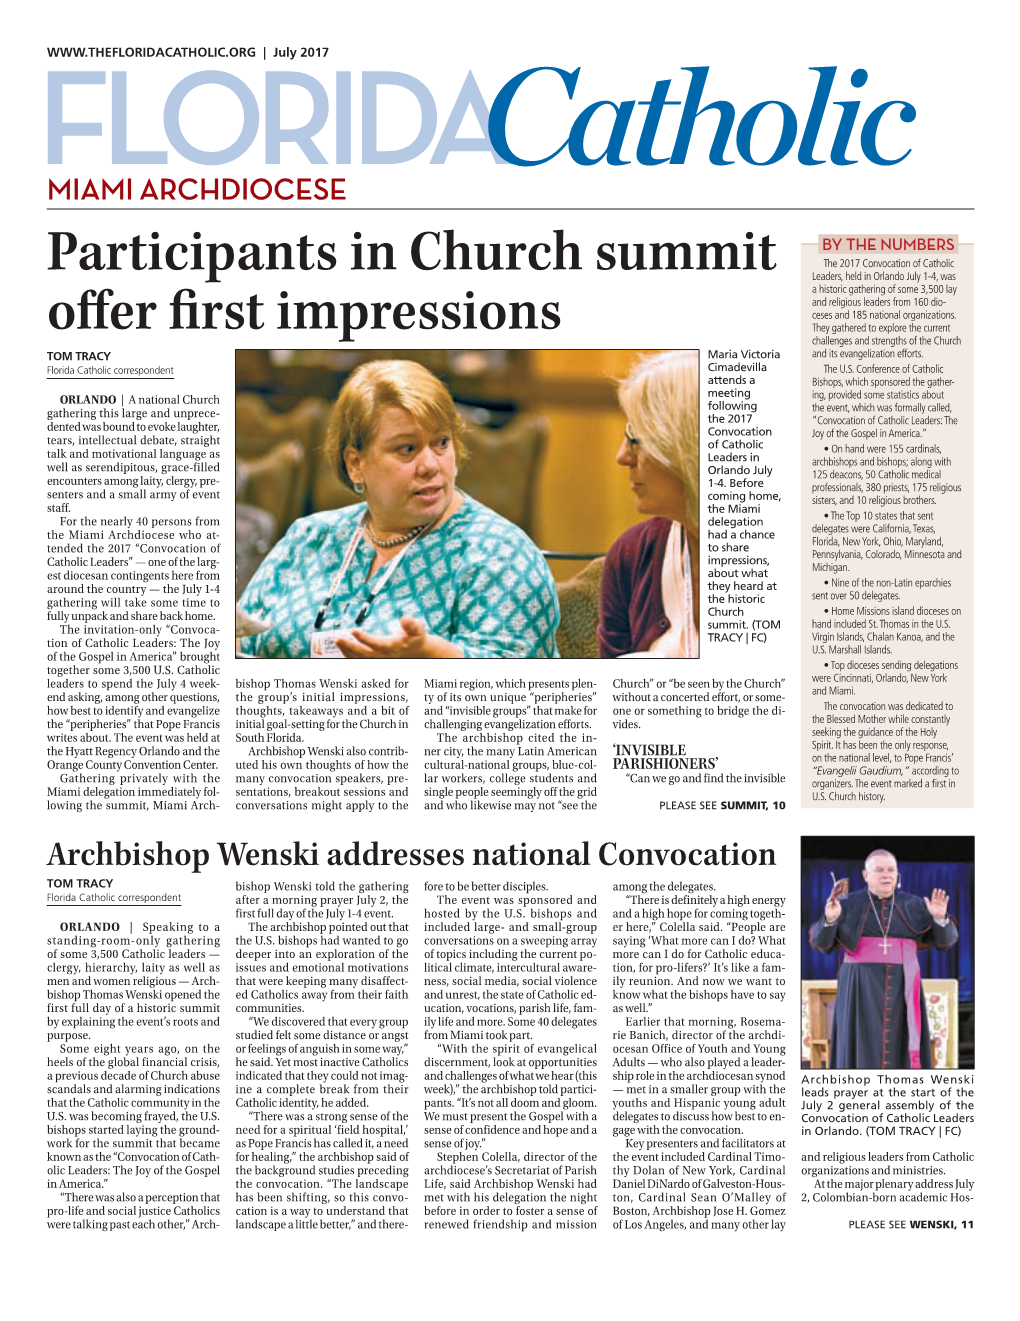 Participants in Church Summit Offer First Impressions